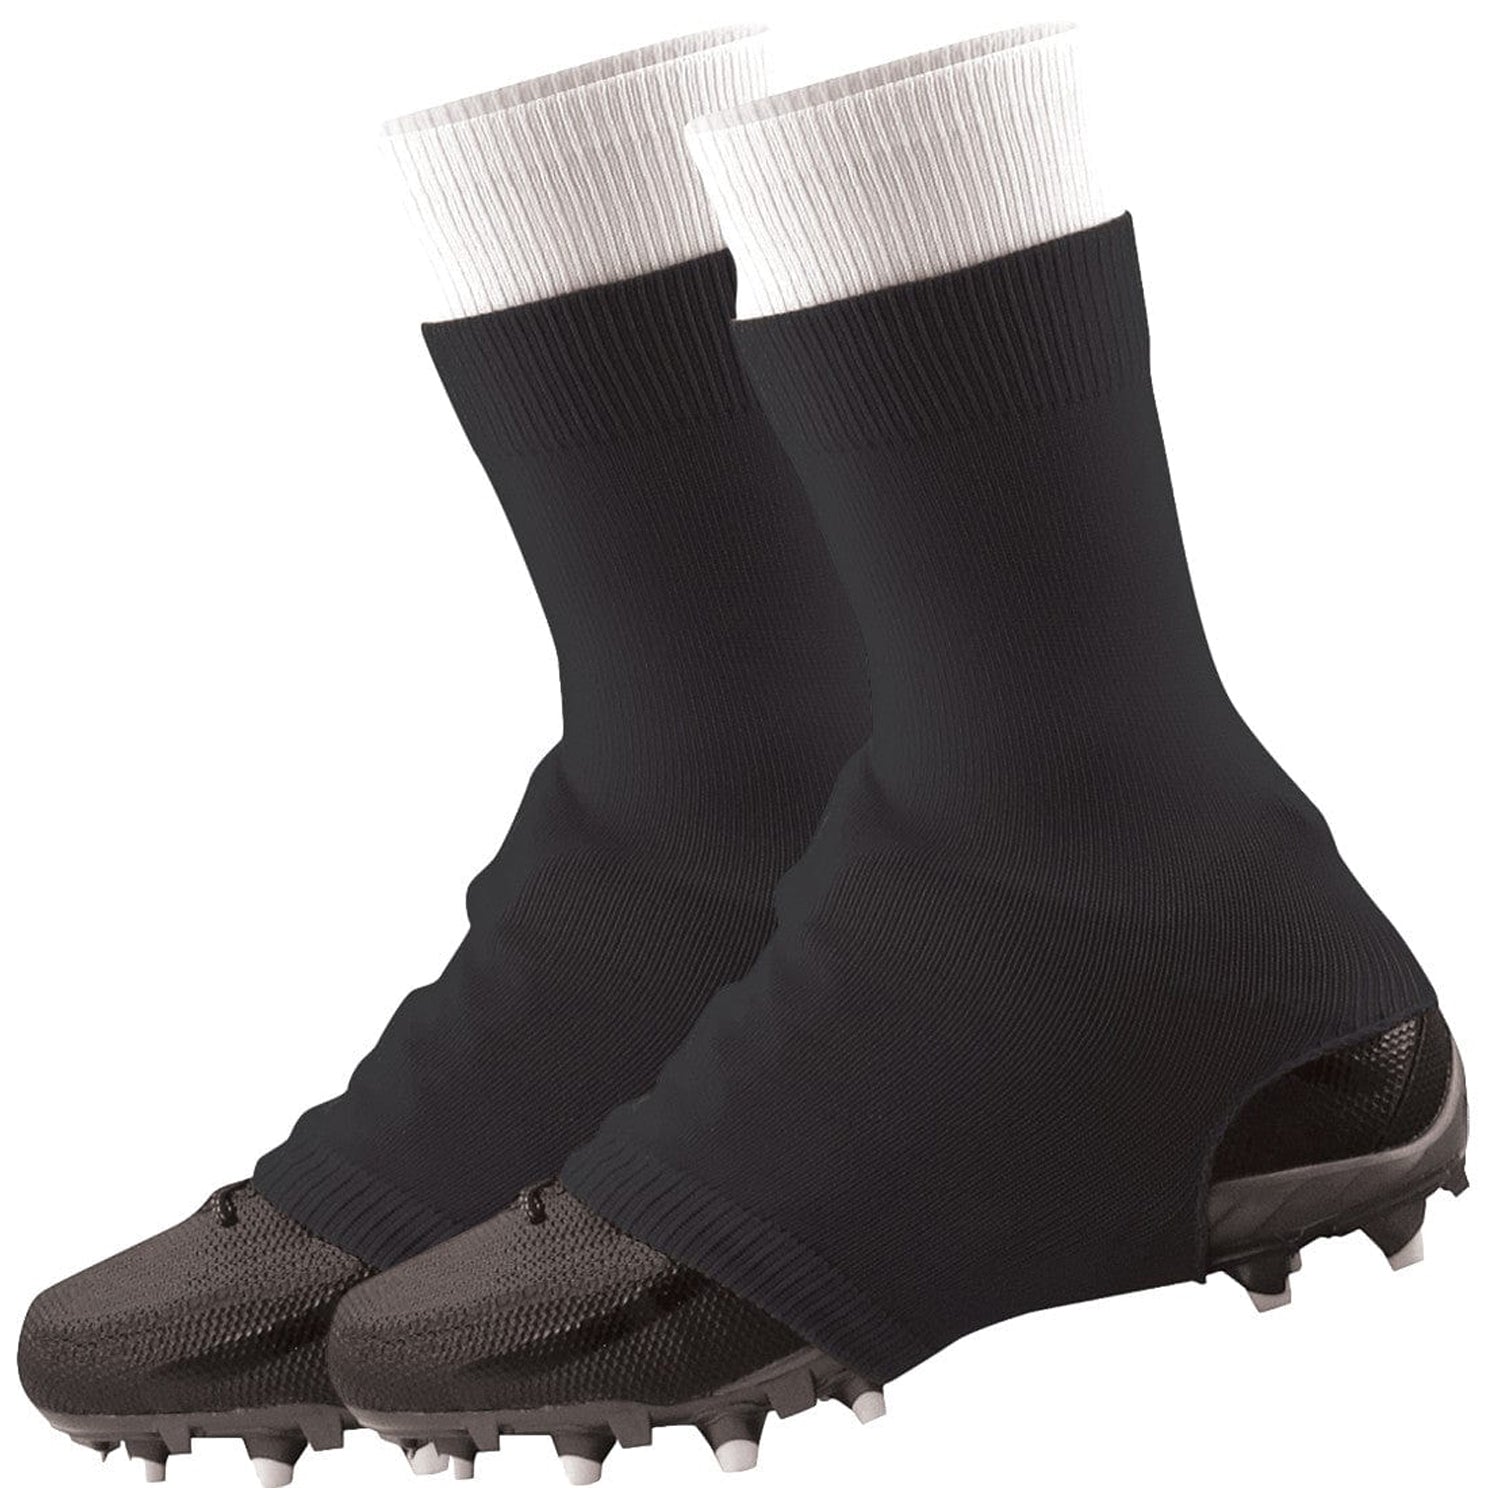 black football cleat covers